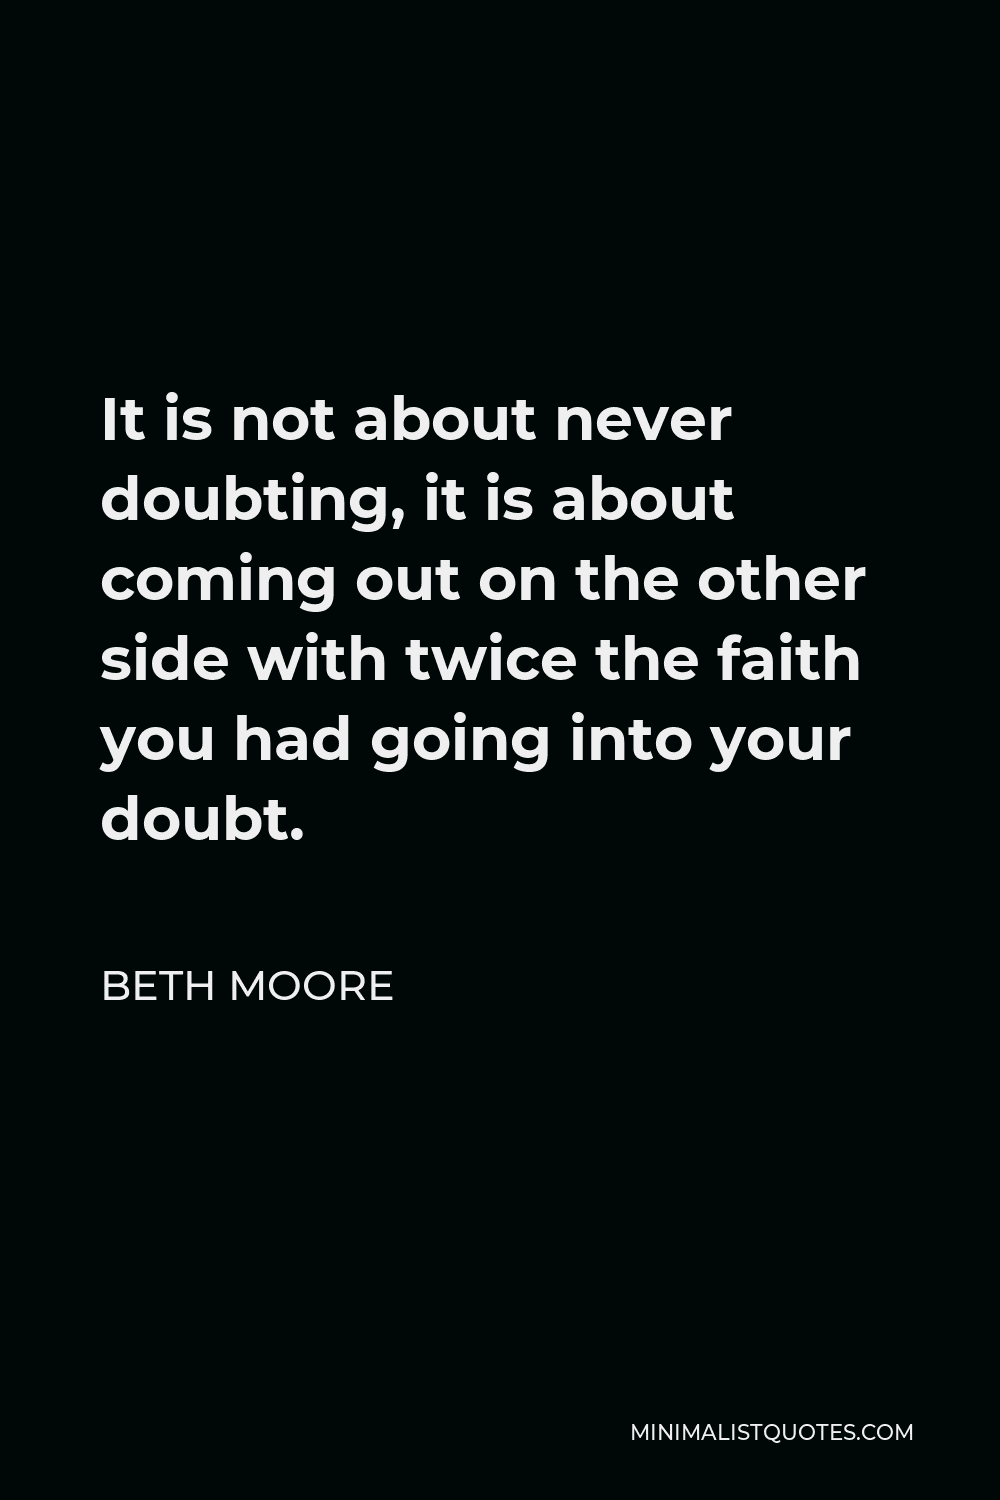 Beth Moore Quote - It is not about never doubting, it is about coming out on the other side with twice the faith you had going into your doubt.